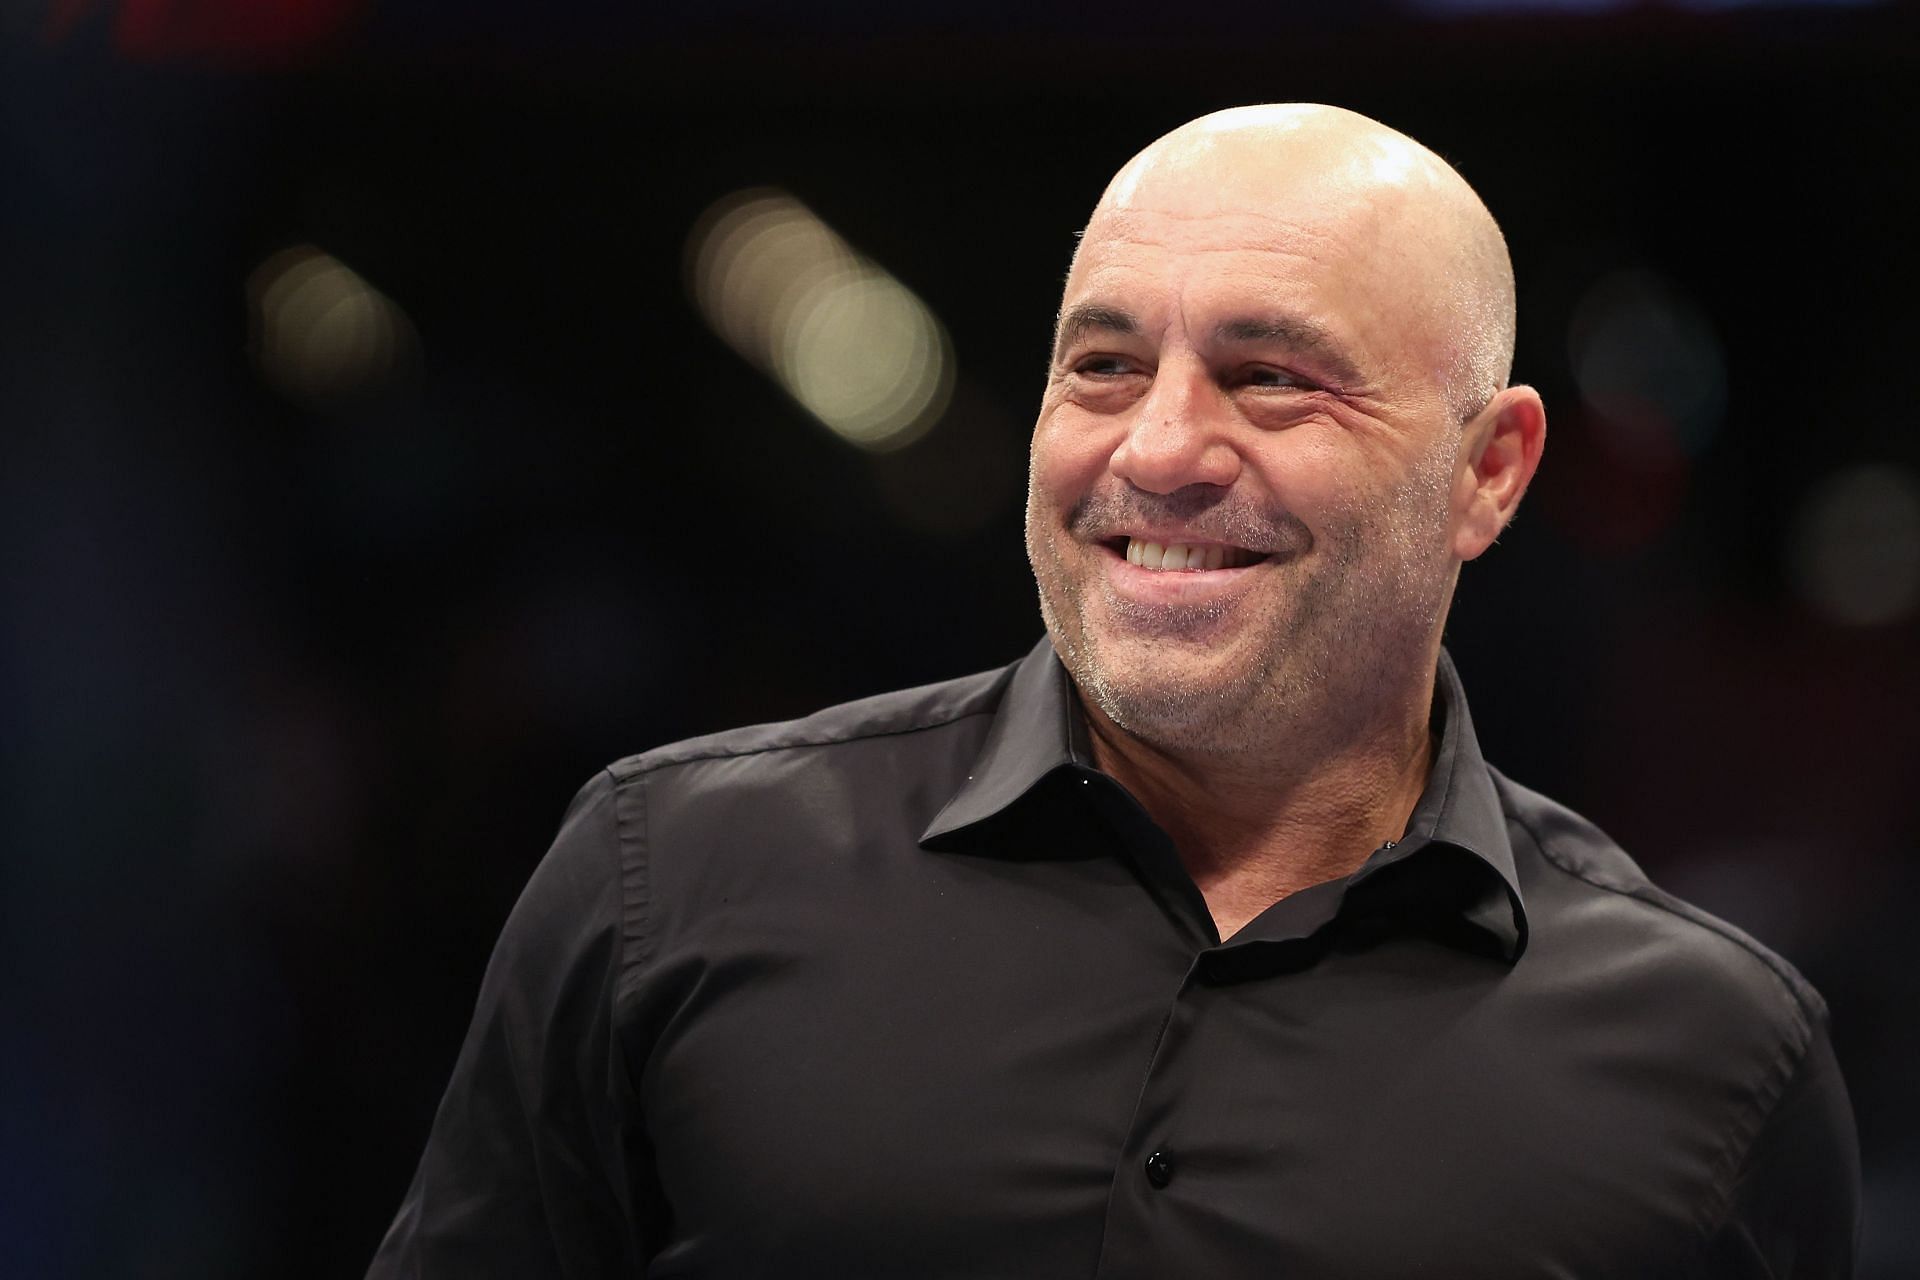 Stand-up comedian and UFC commentator Joe Rogan